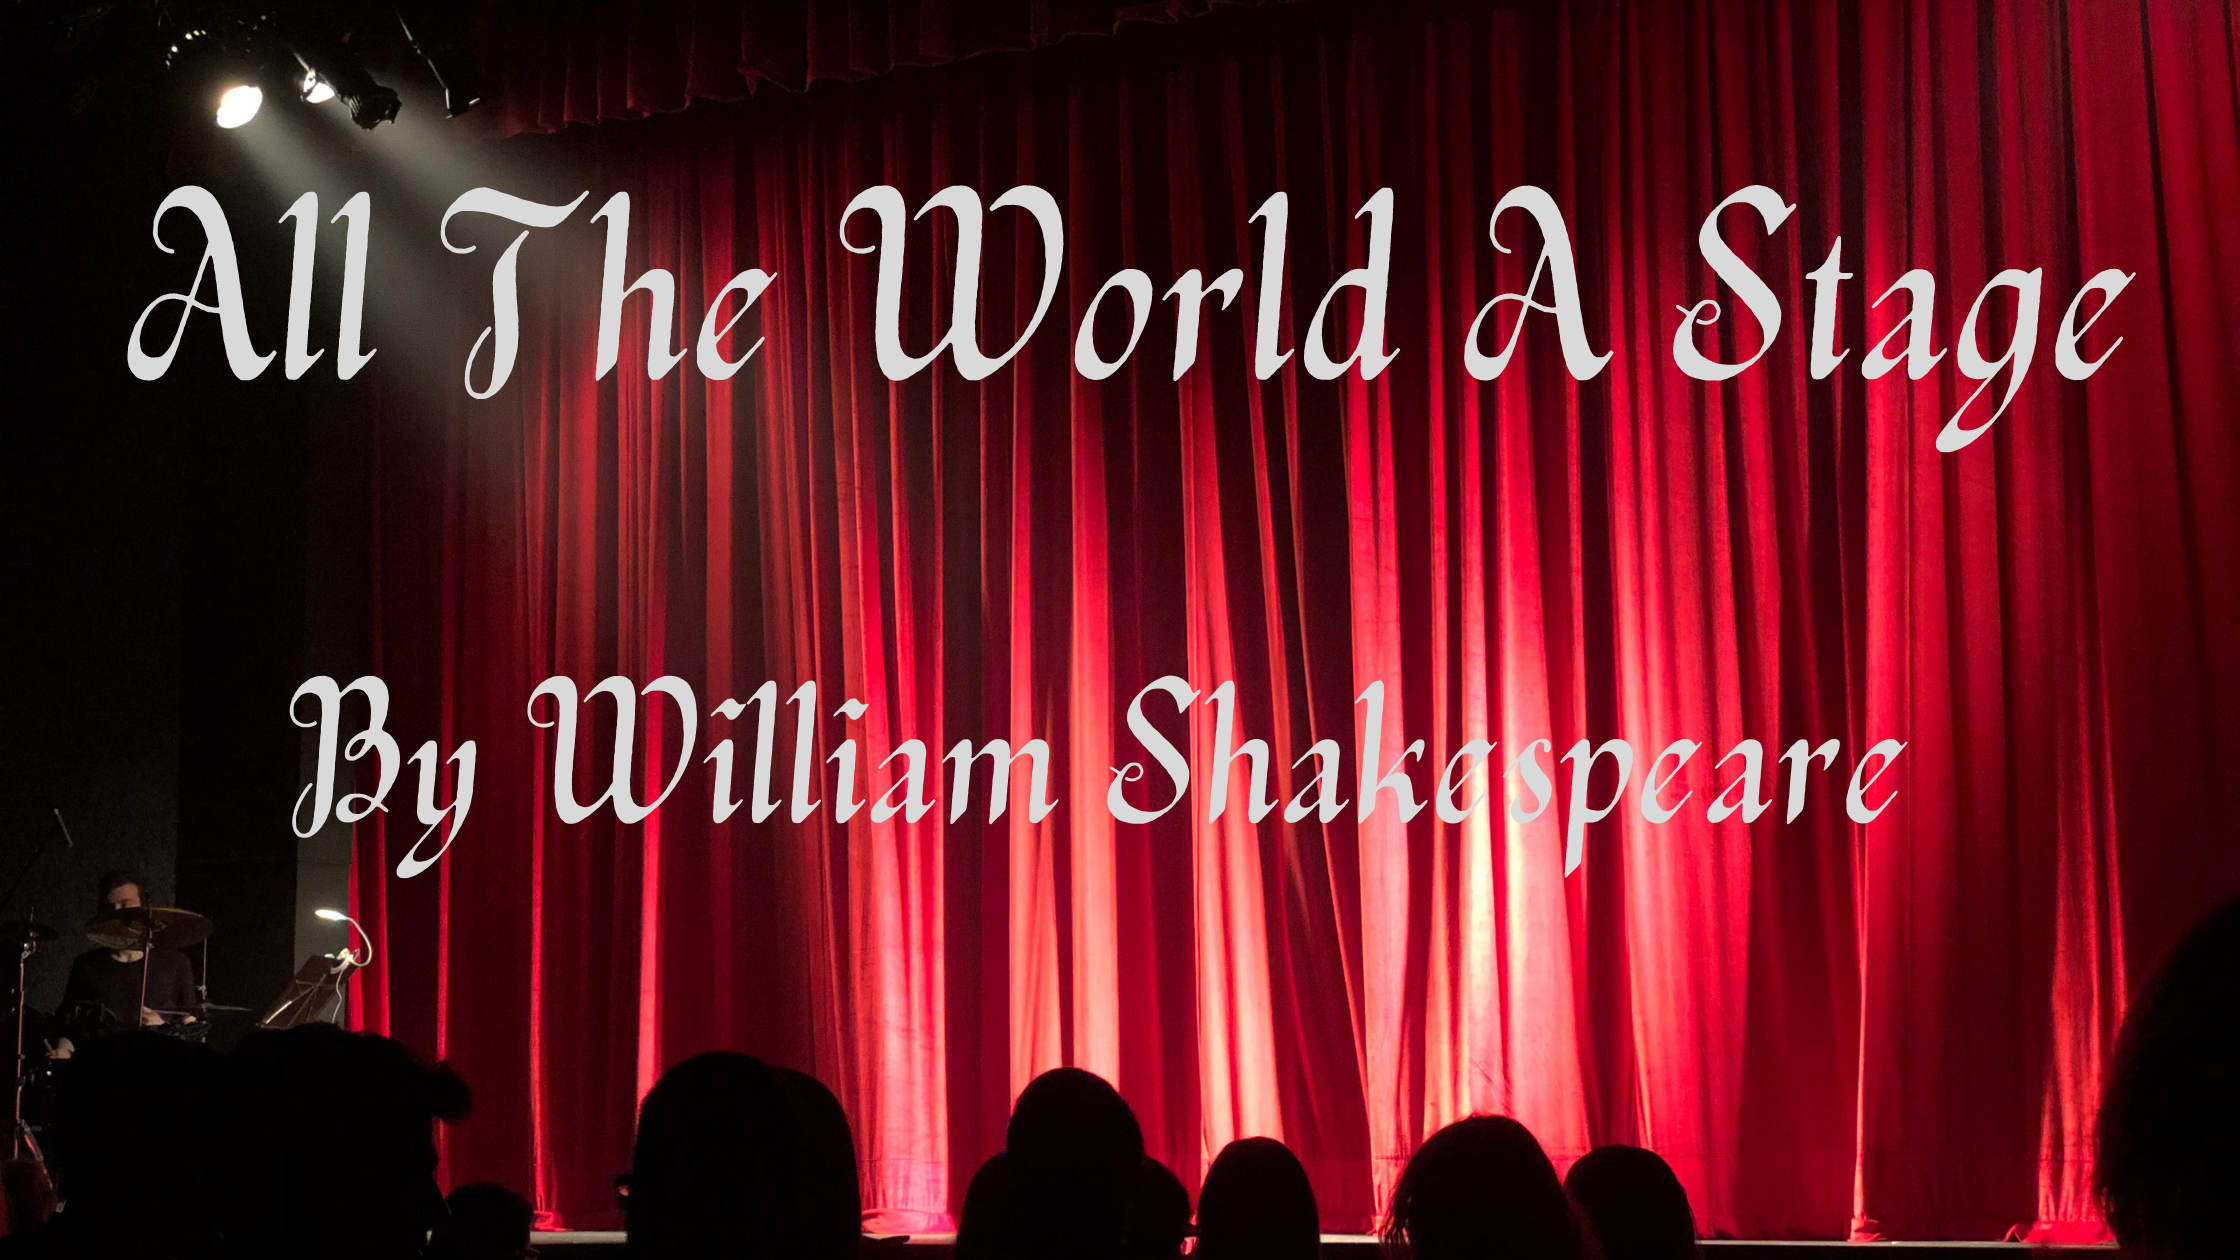 English Poem In Hindi “All the Worlds a Stage” By William Shakespeare